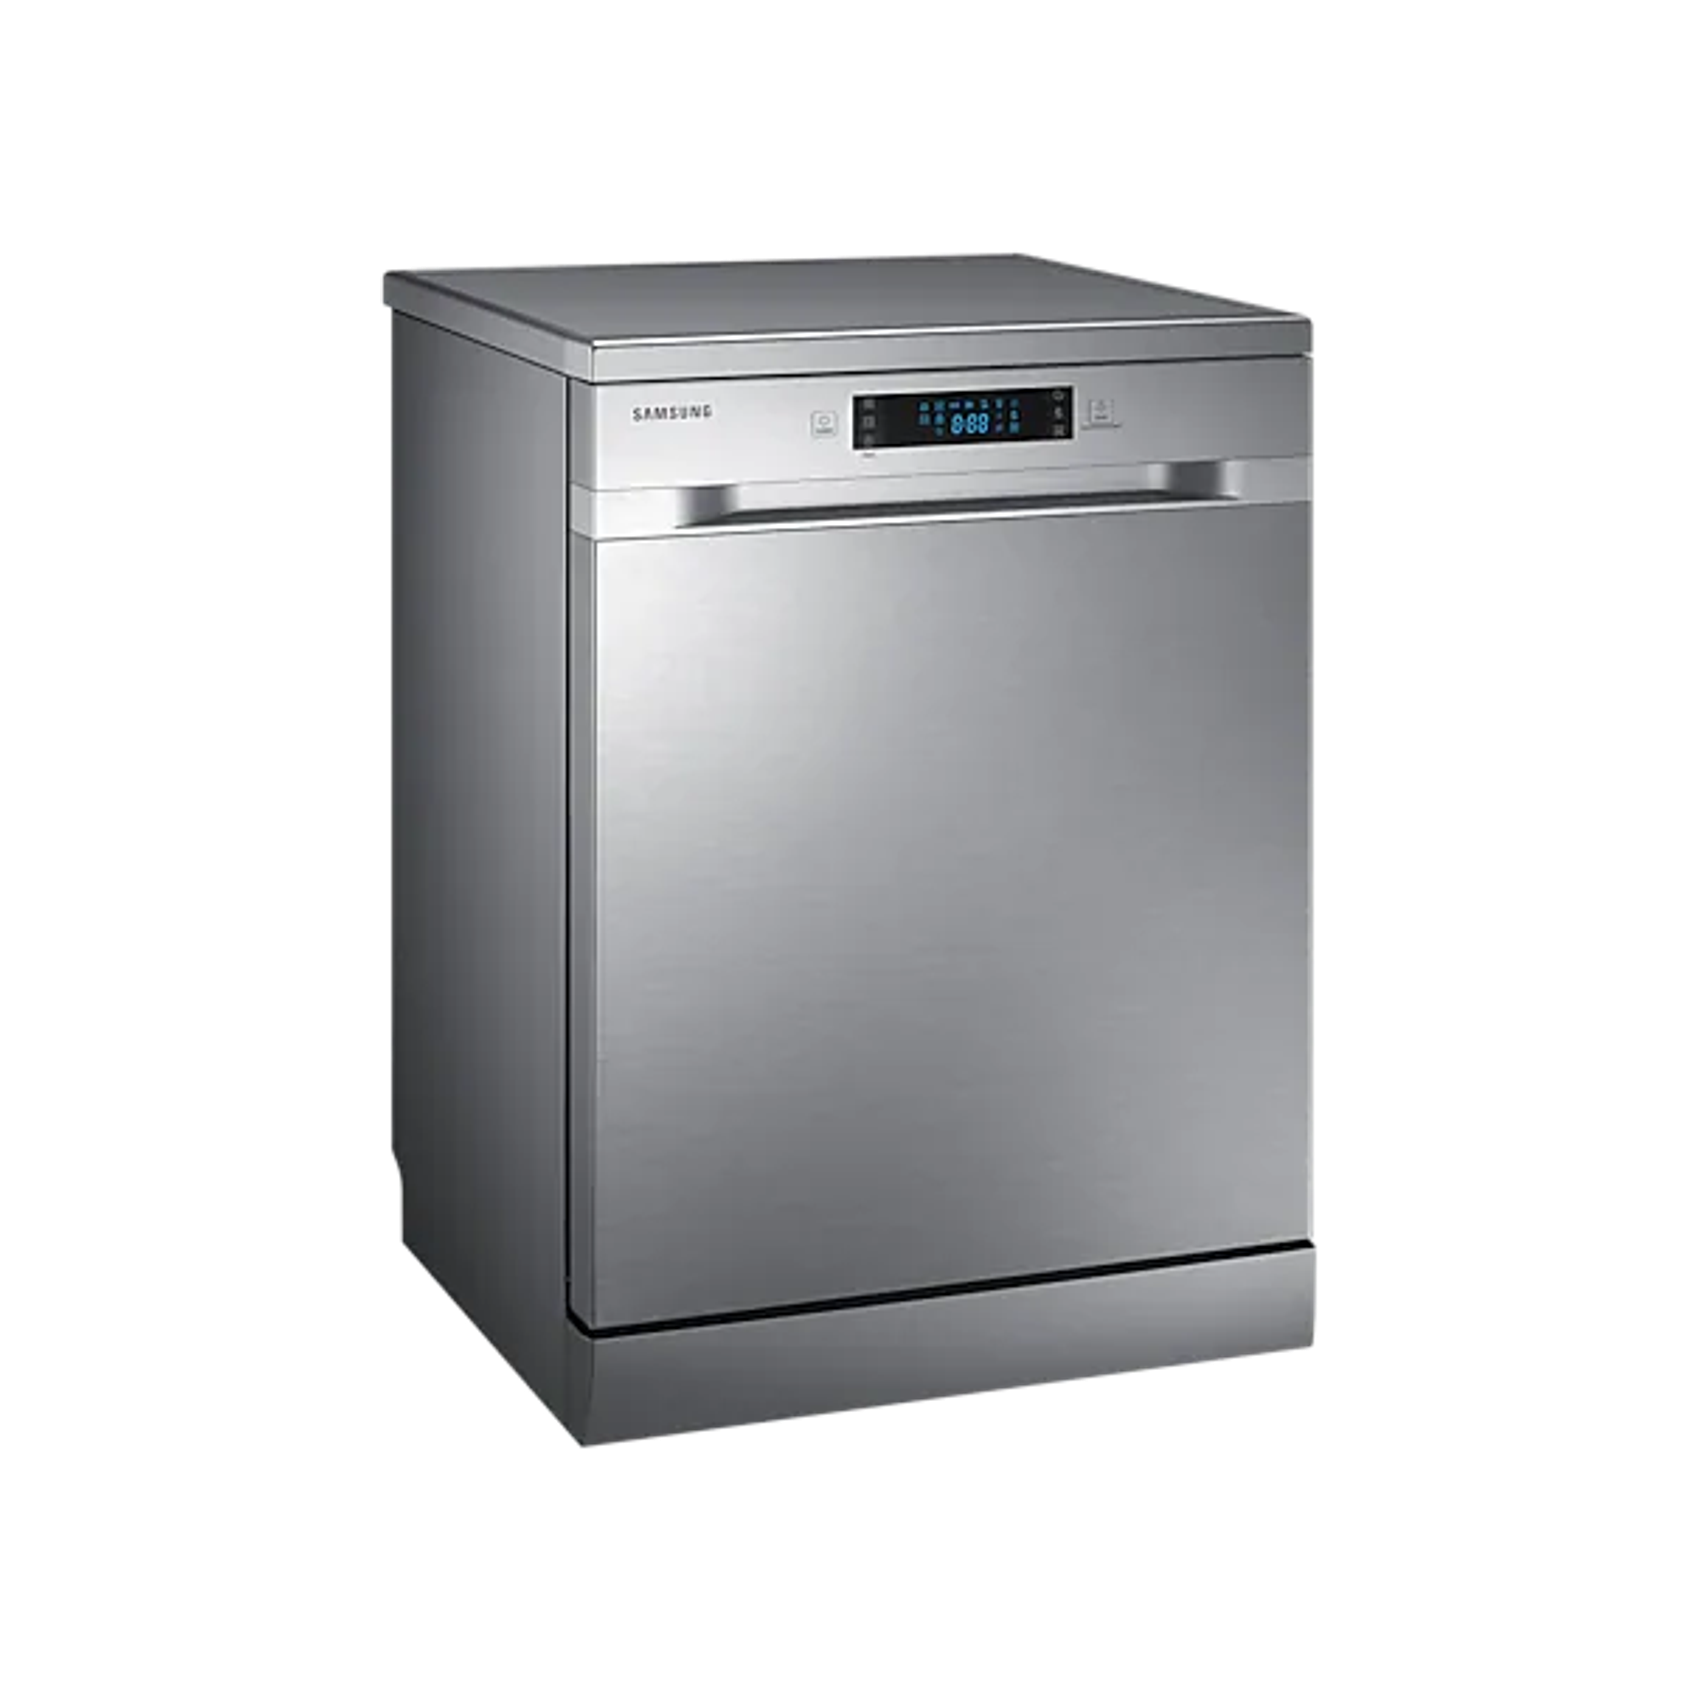 Samsung 14 Place Dishwasher with Wide Led Display - Silver (Photo: 8)